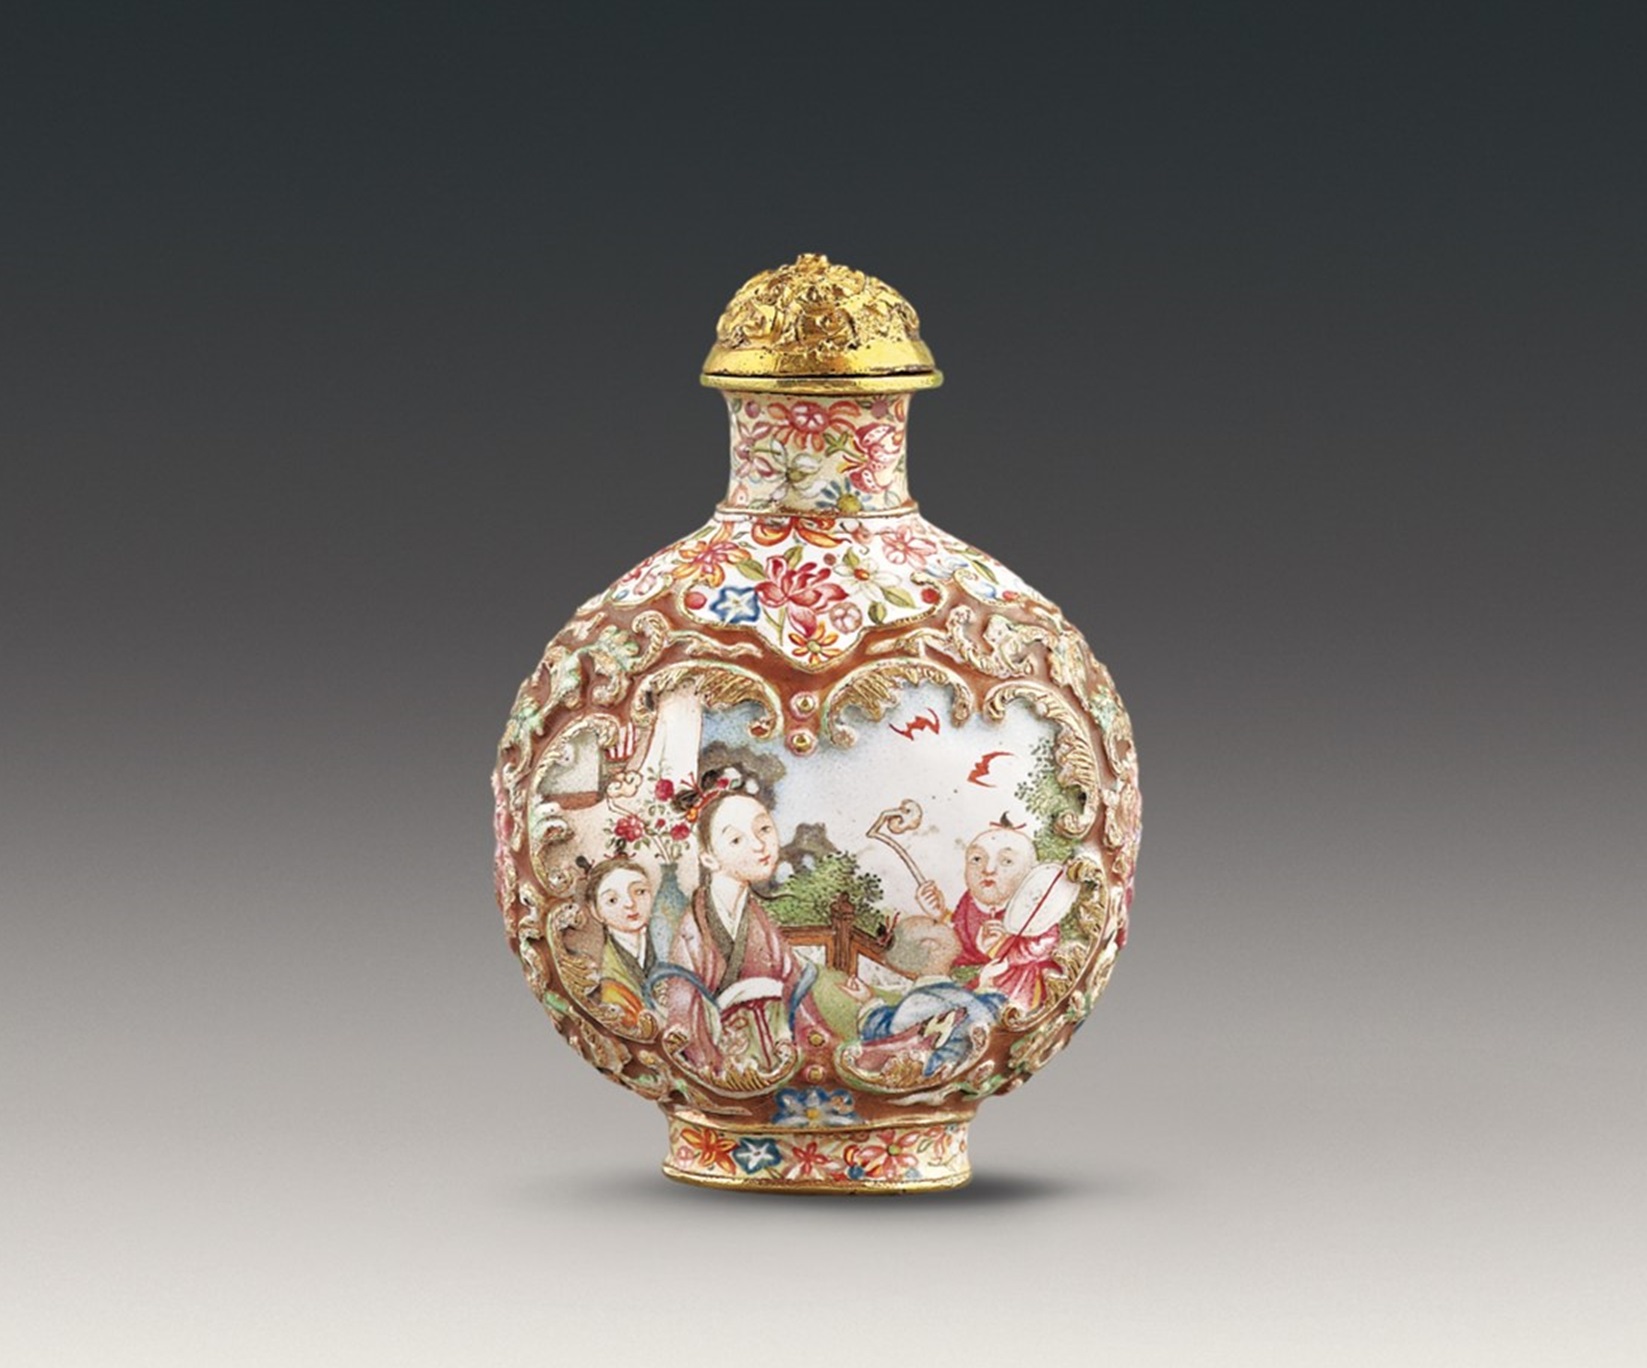 Gold snuff bottle with scene of mother and children in painted enamels